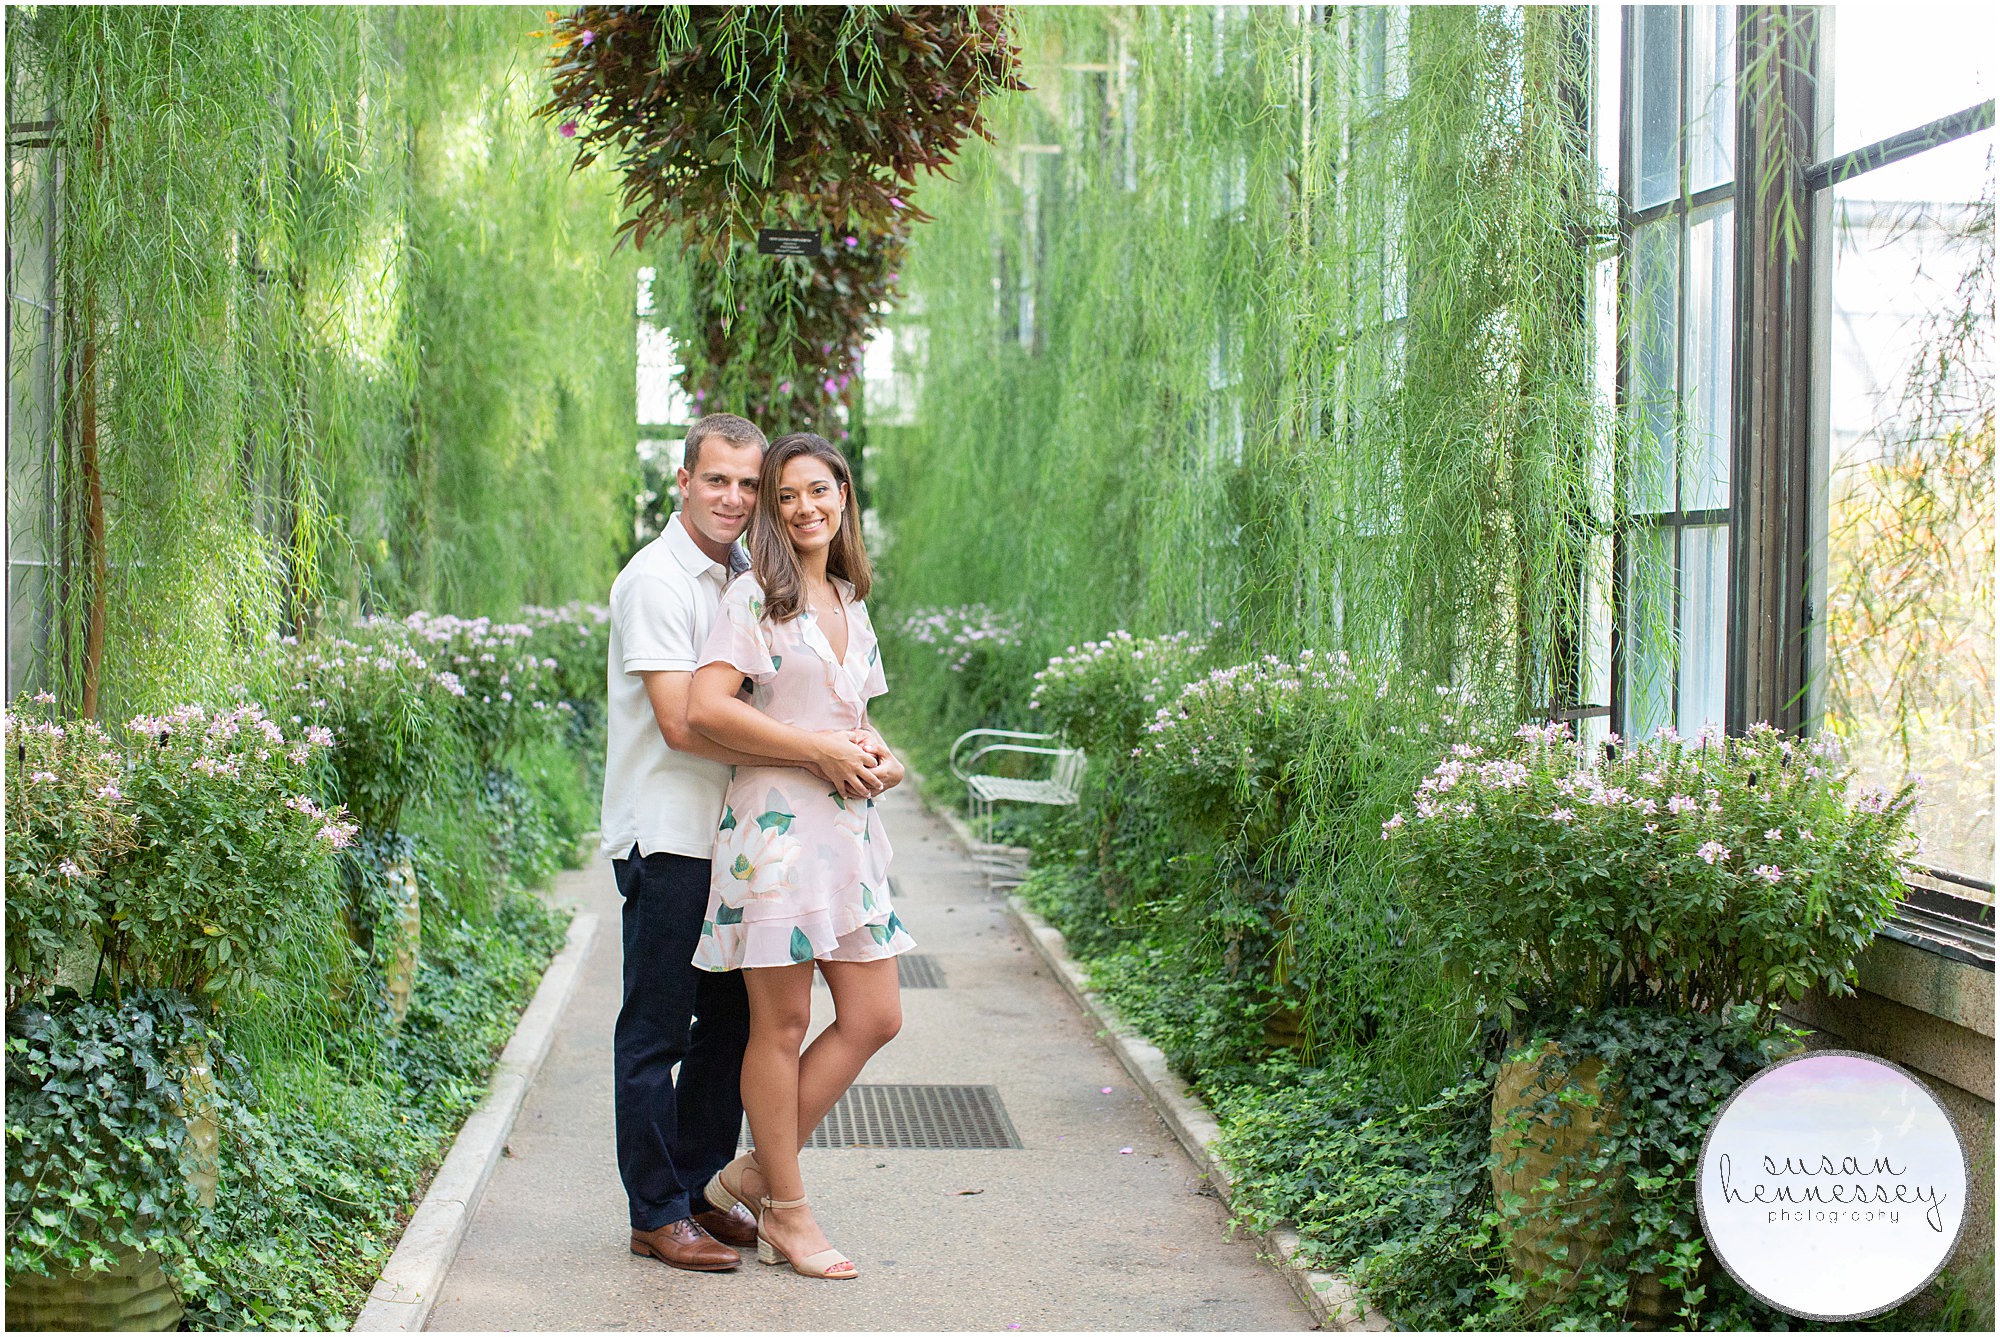 Engagement session at Longwood Gardens